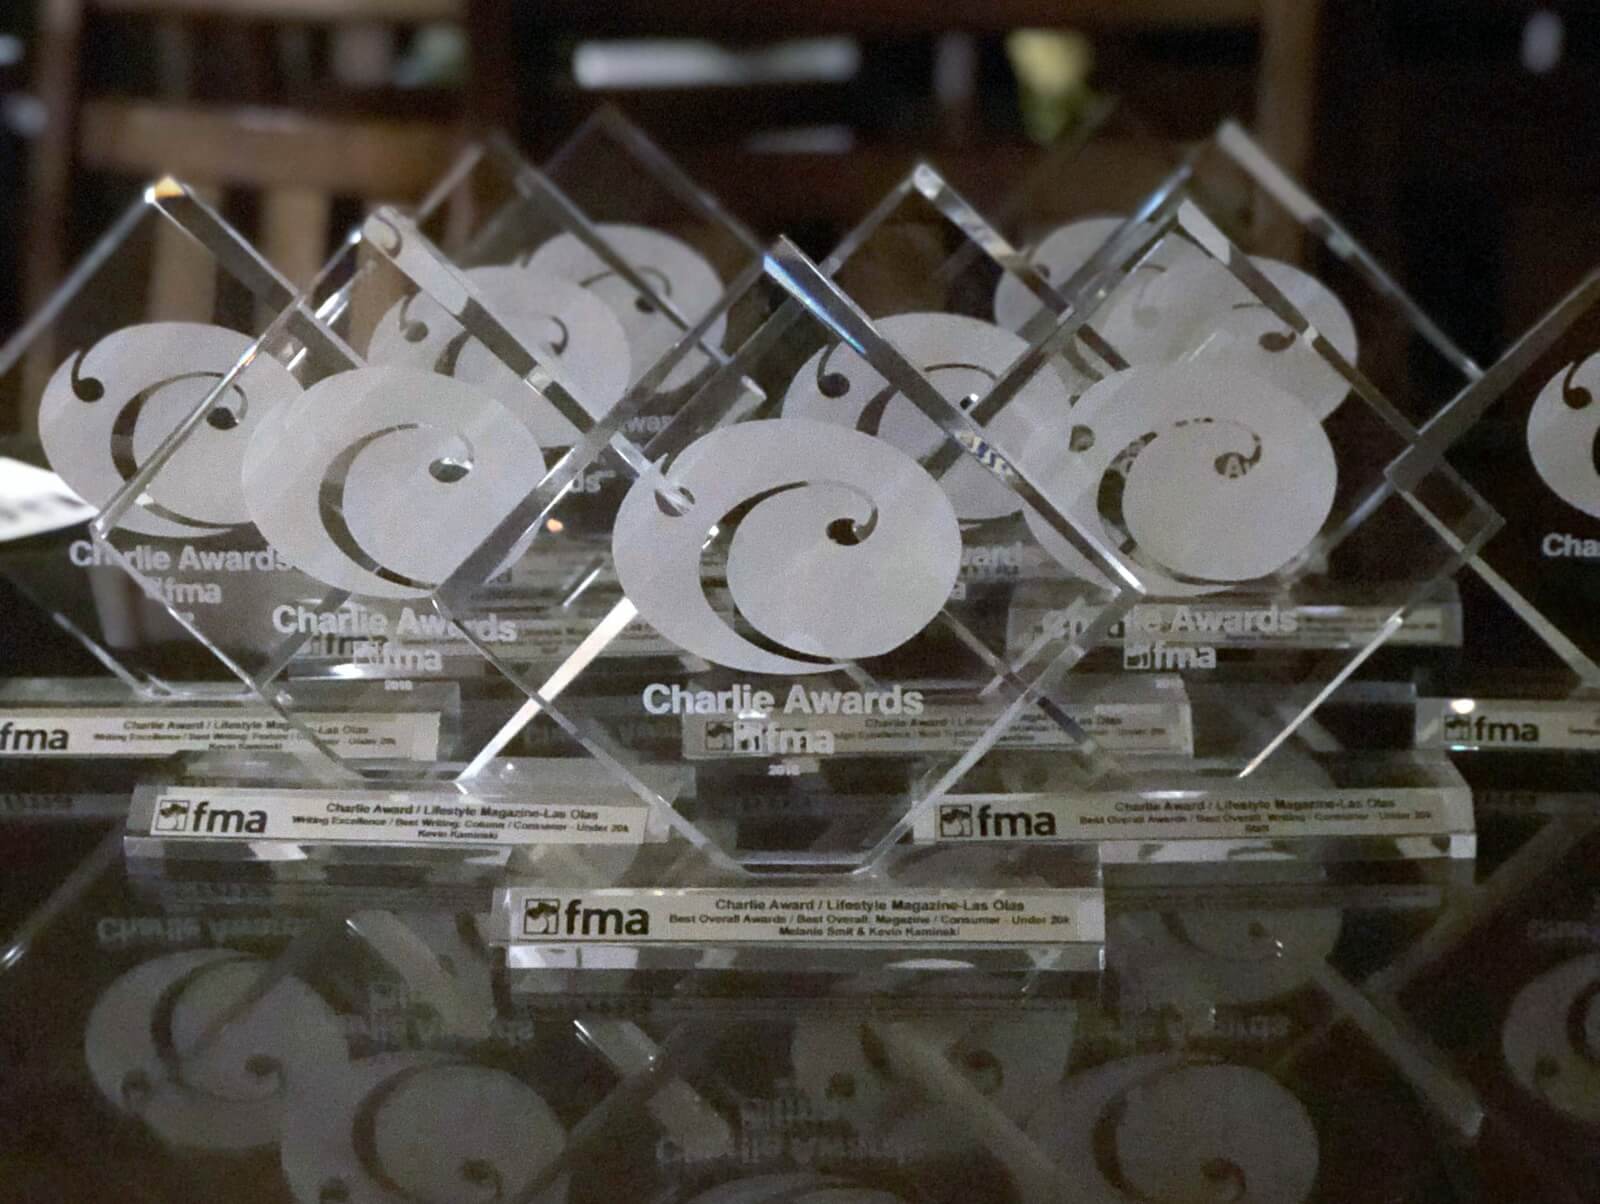 12 FMA Awards for Lifestyle Magazines placed on a table